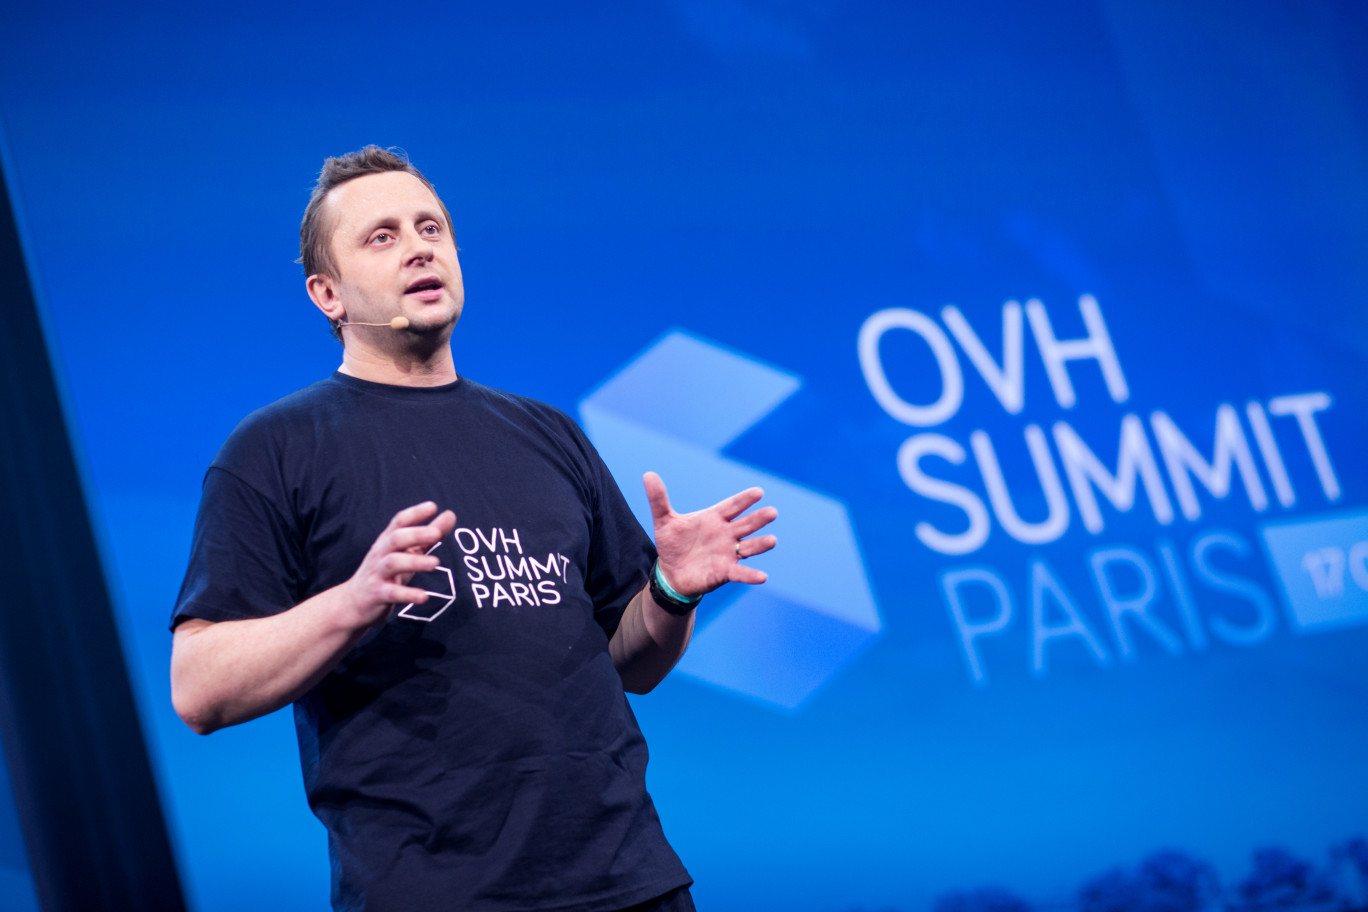 Octave Klaba, founder of OVH, during his keynote speech at the OVH Summit, Paris.